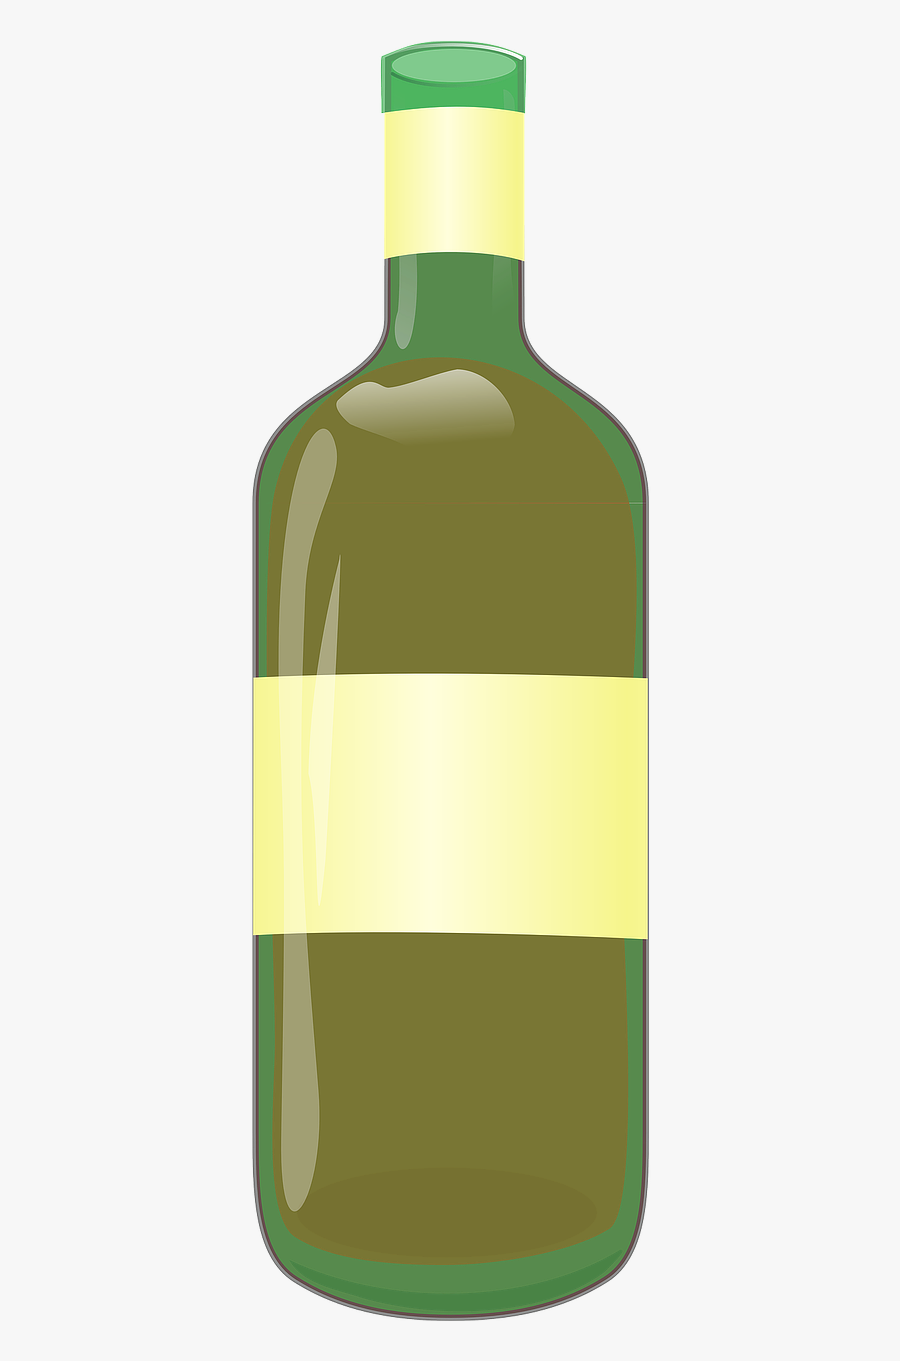 Liquor Bottle Green Free Photo - Cheese And Wine Cartoon, Transparent Clipart